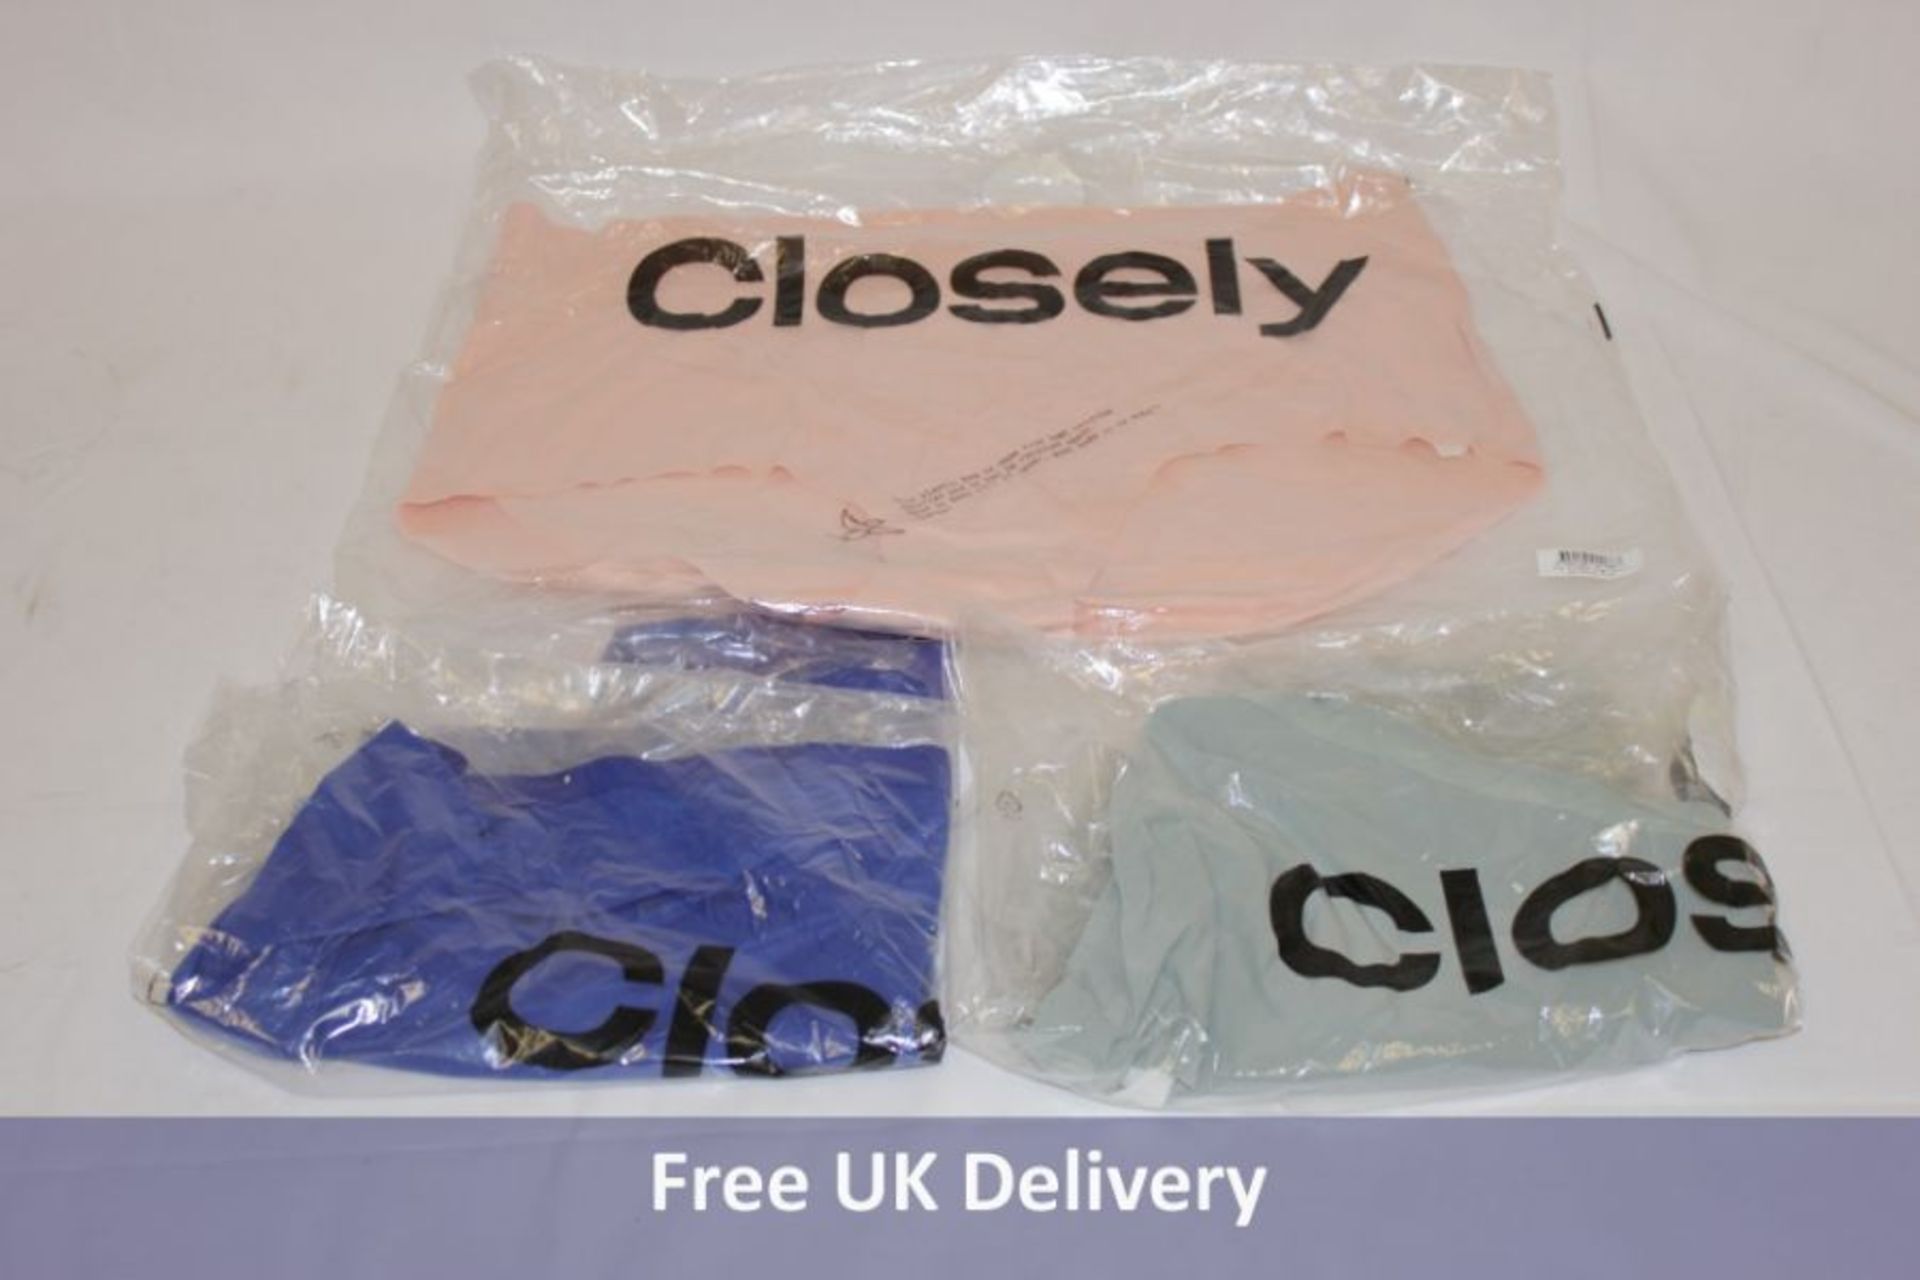 Six Closely Womens Briefs to include 4x Dusty Green, UK Size 3XL, 1x Dusty Pink, UK Size XXL and 1x